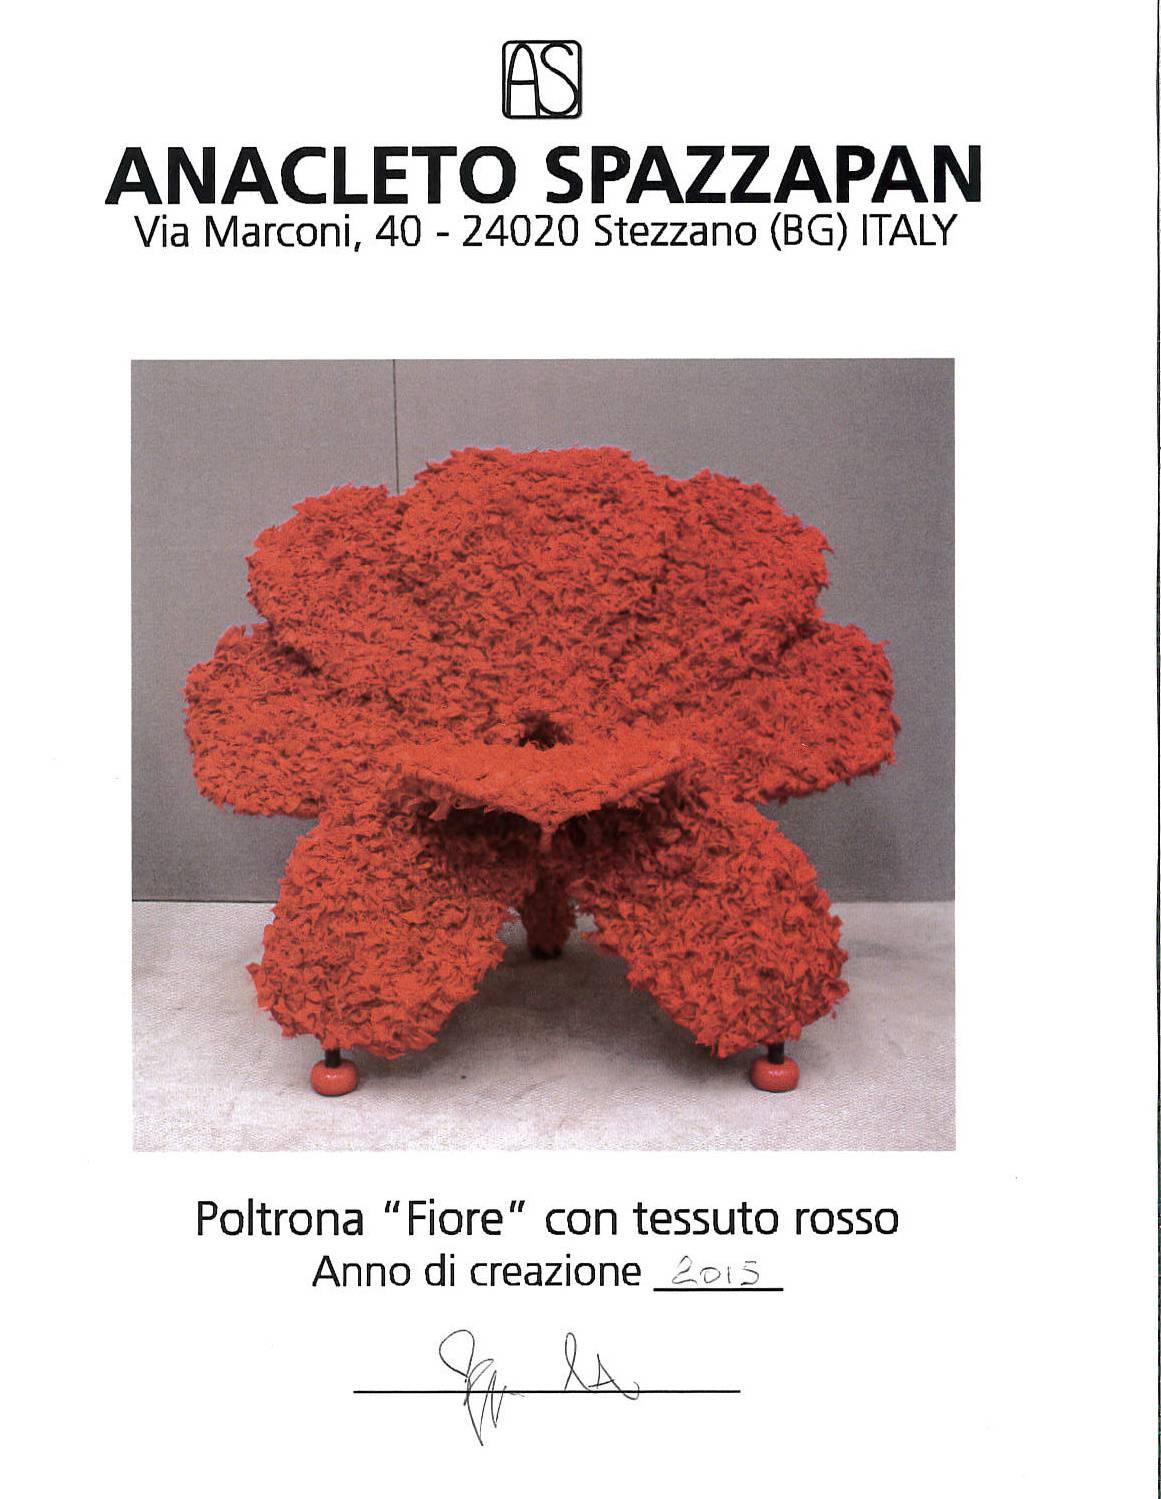 Modern red flower armchair 
by Anacleto Spazzapan Poltrona 
Italy 2015
